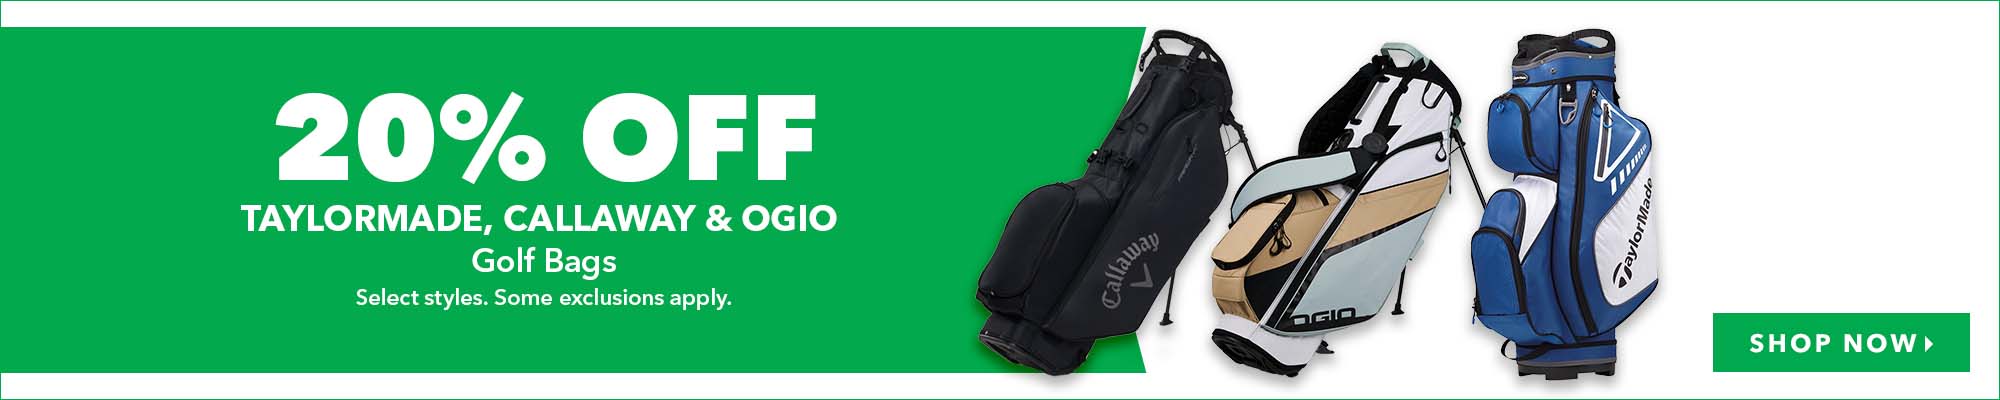 Select TaylorMade, Callaway & Ogio Prior Gen. Golf Bags - 20% off